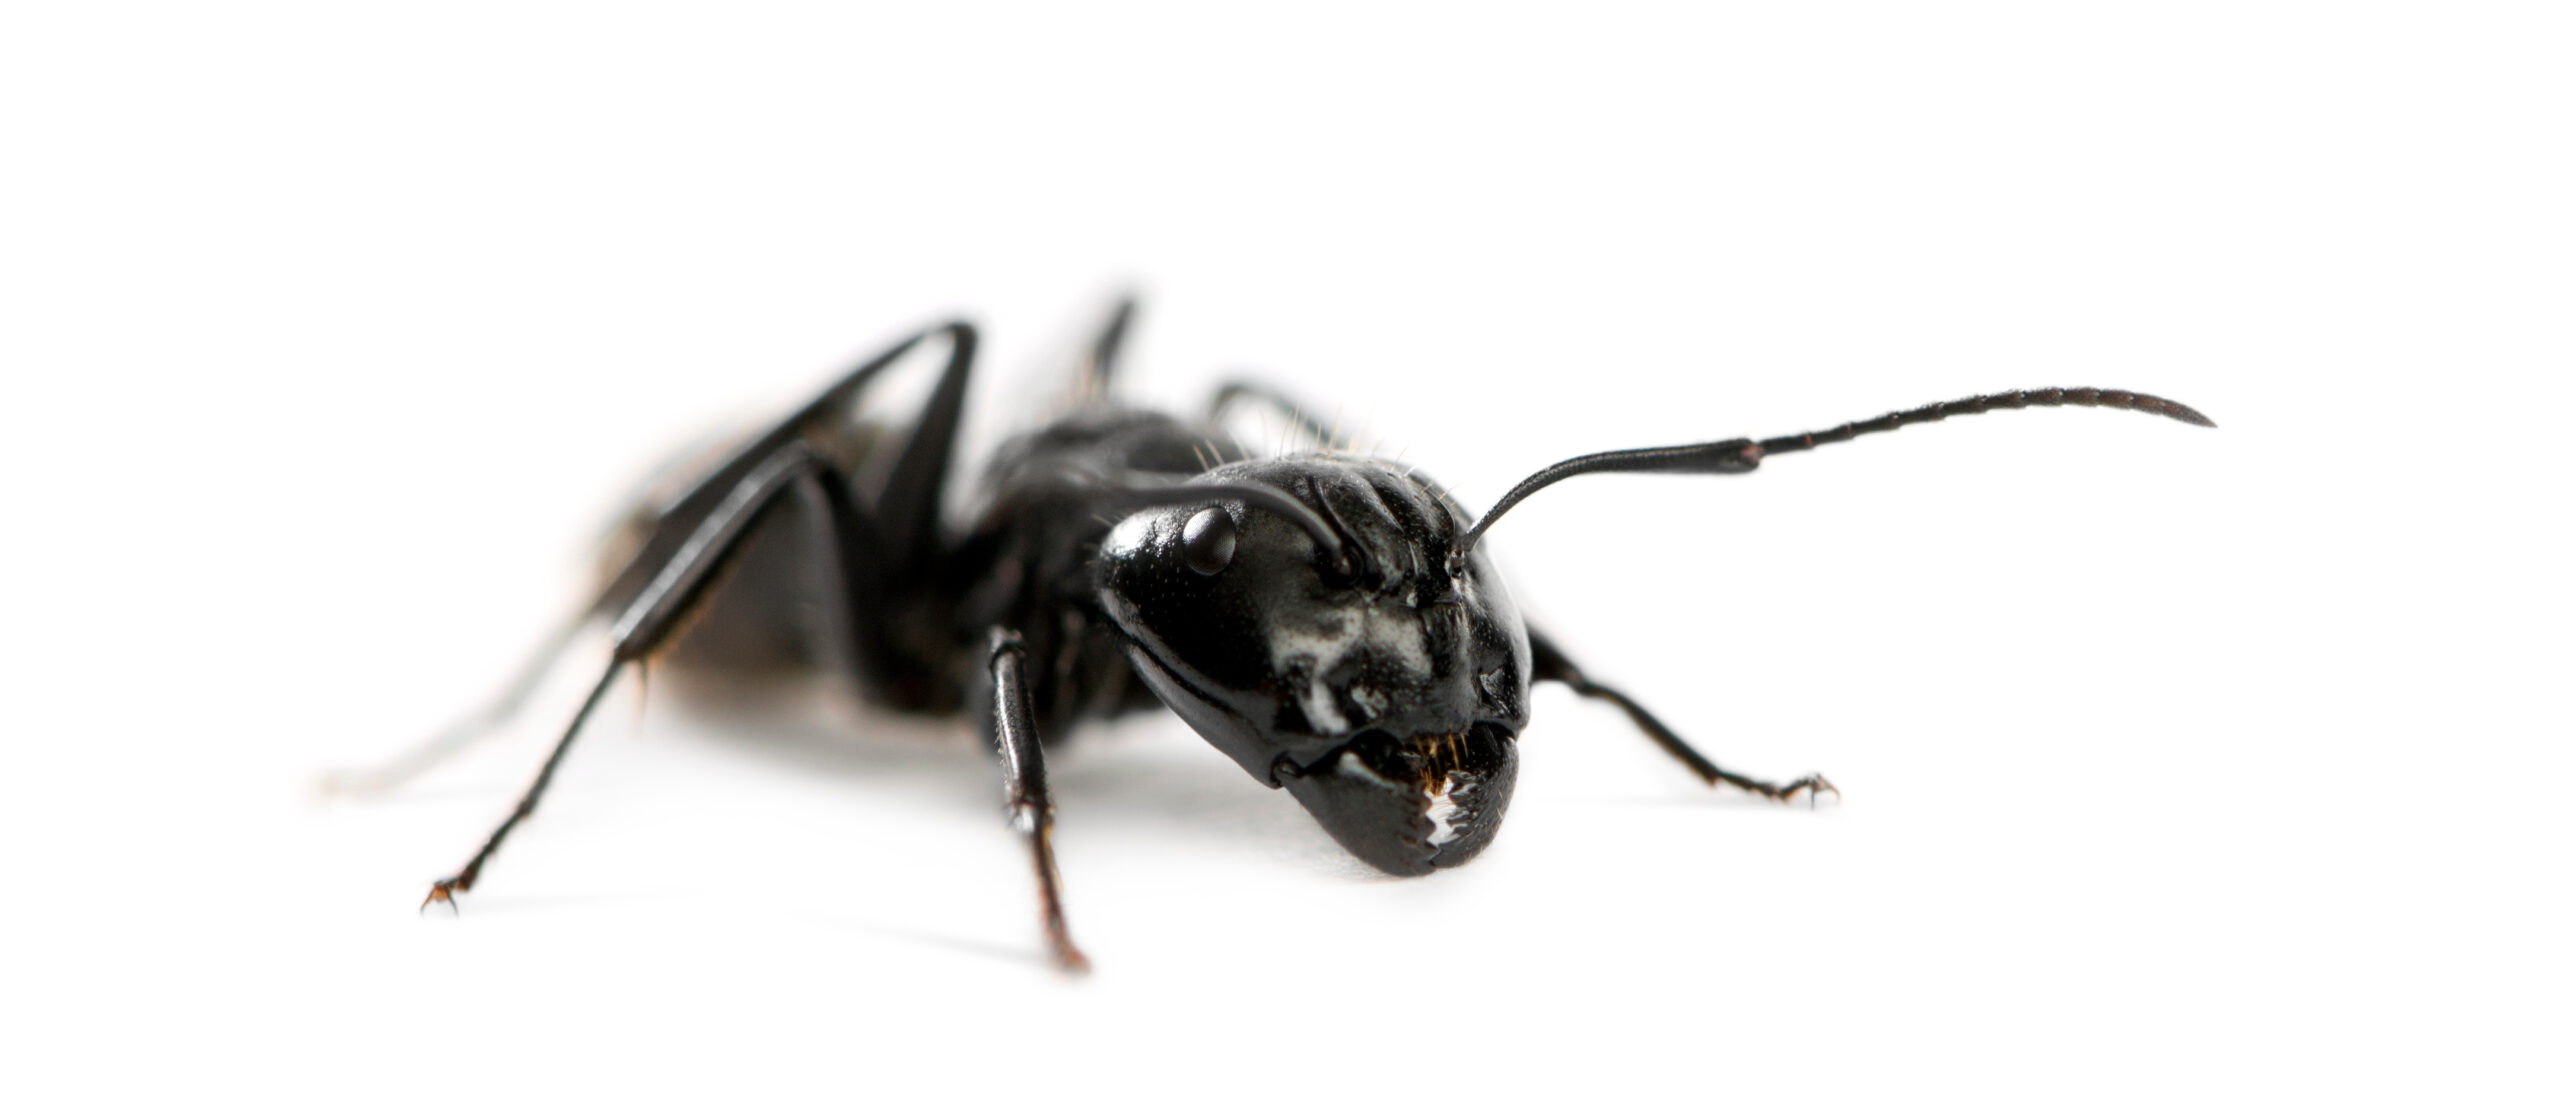 Close up of a carpenter ant on a white background